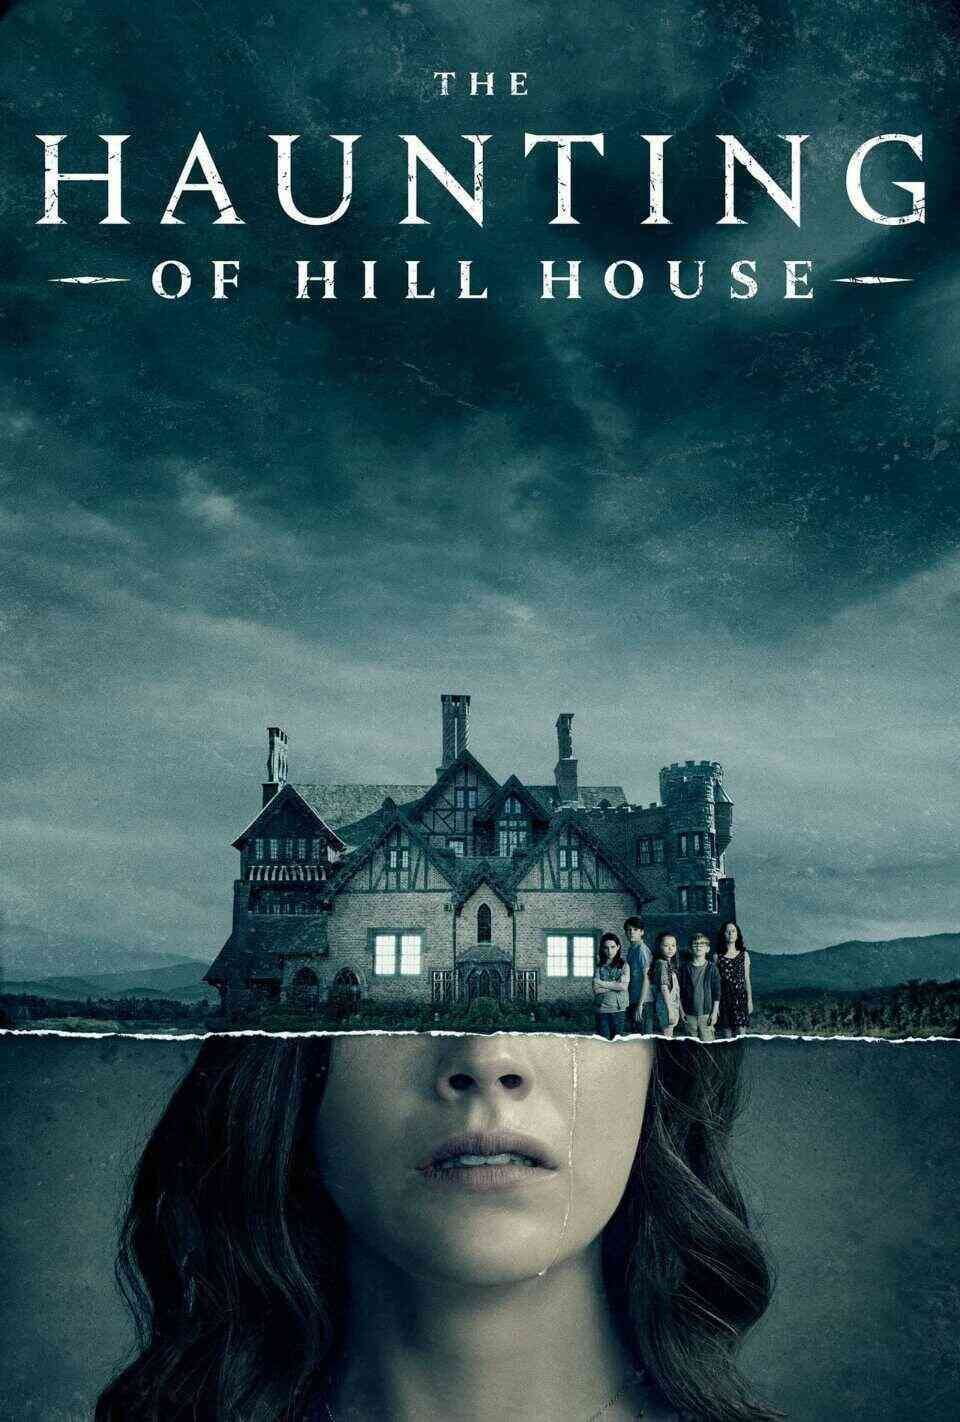 Read The Haunting of Hill House screenplay.